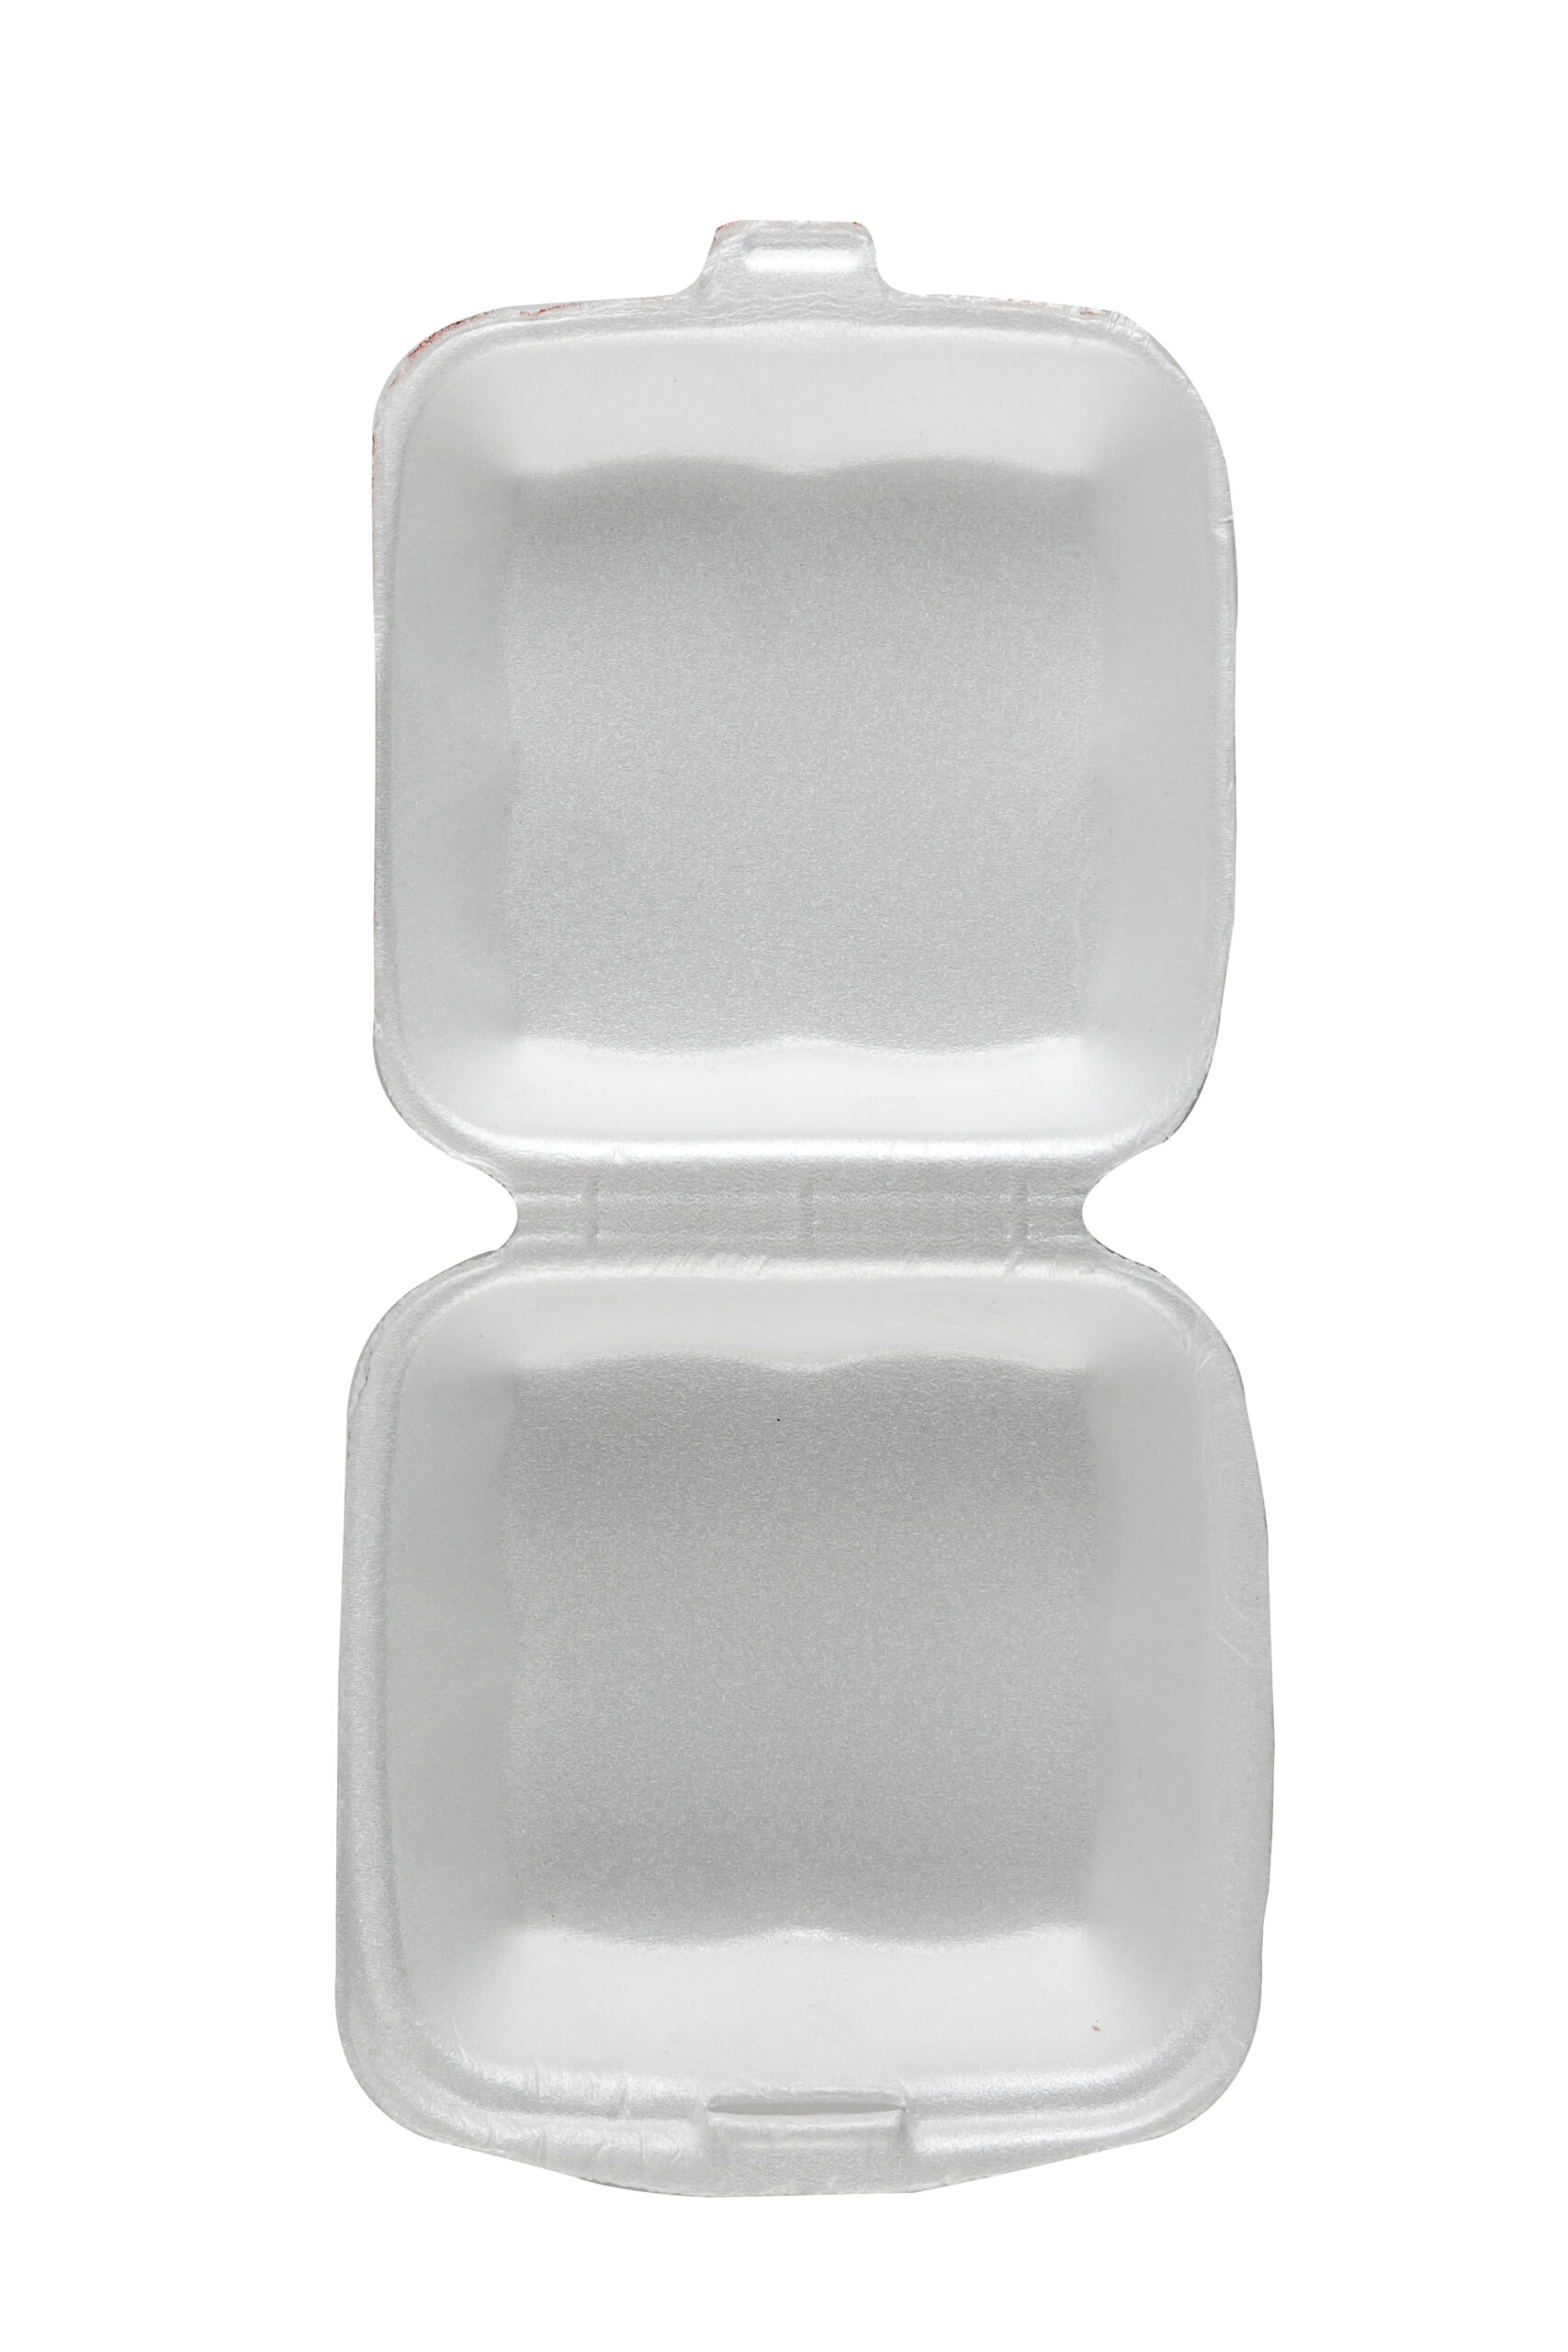 Square Fast Food Container